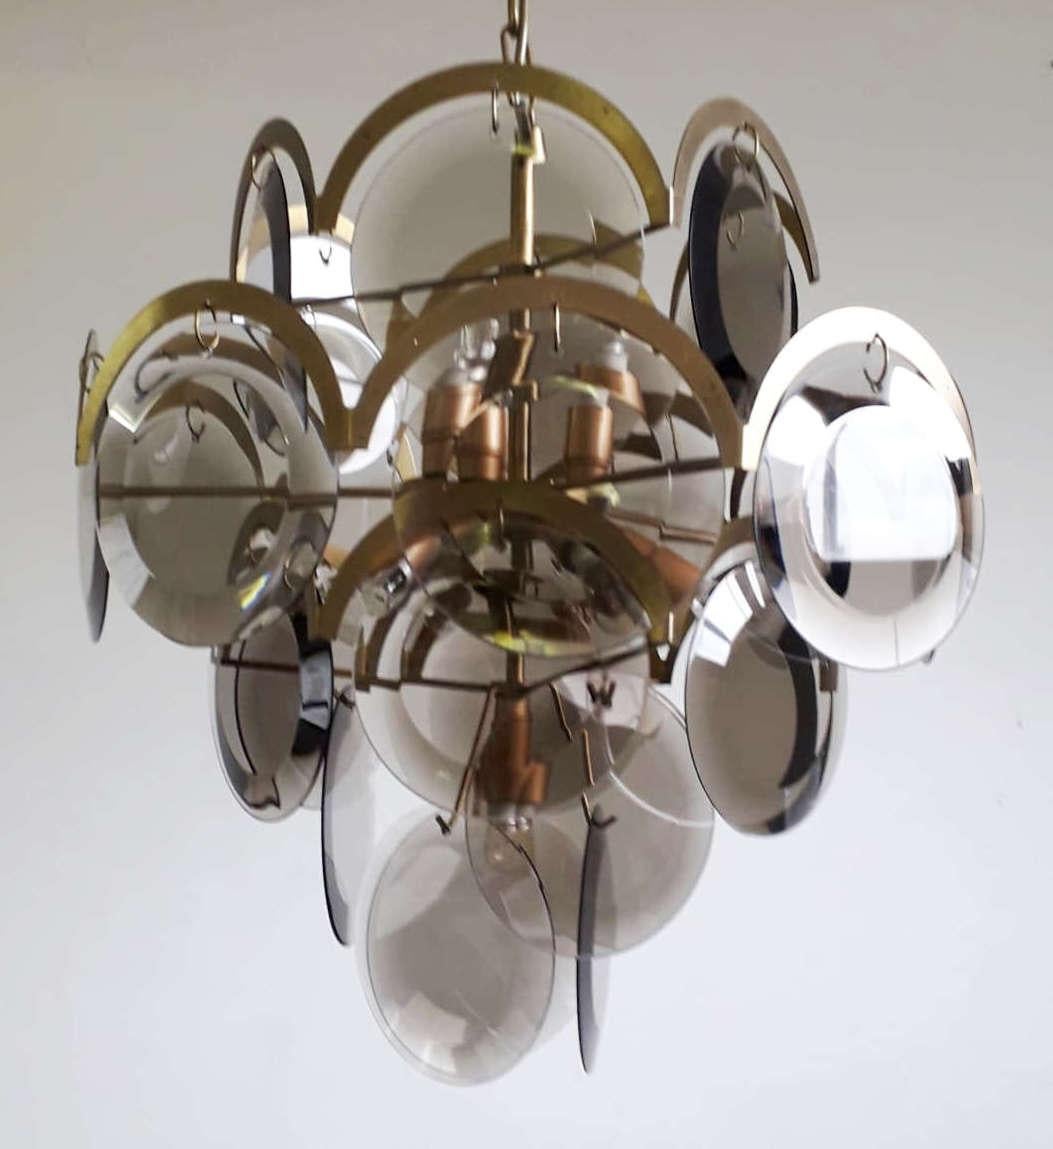 Vintage Italian chandelier with five tiers of smoky beveled glass discs mounted on brass frame, with a half moon brass arch above each disc / Designed and made by VIstosi in Italy, circa 1960s
10 lights / E12 or E14 / max 40W each
Measures: diameter